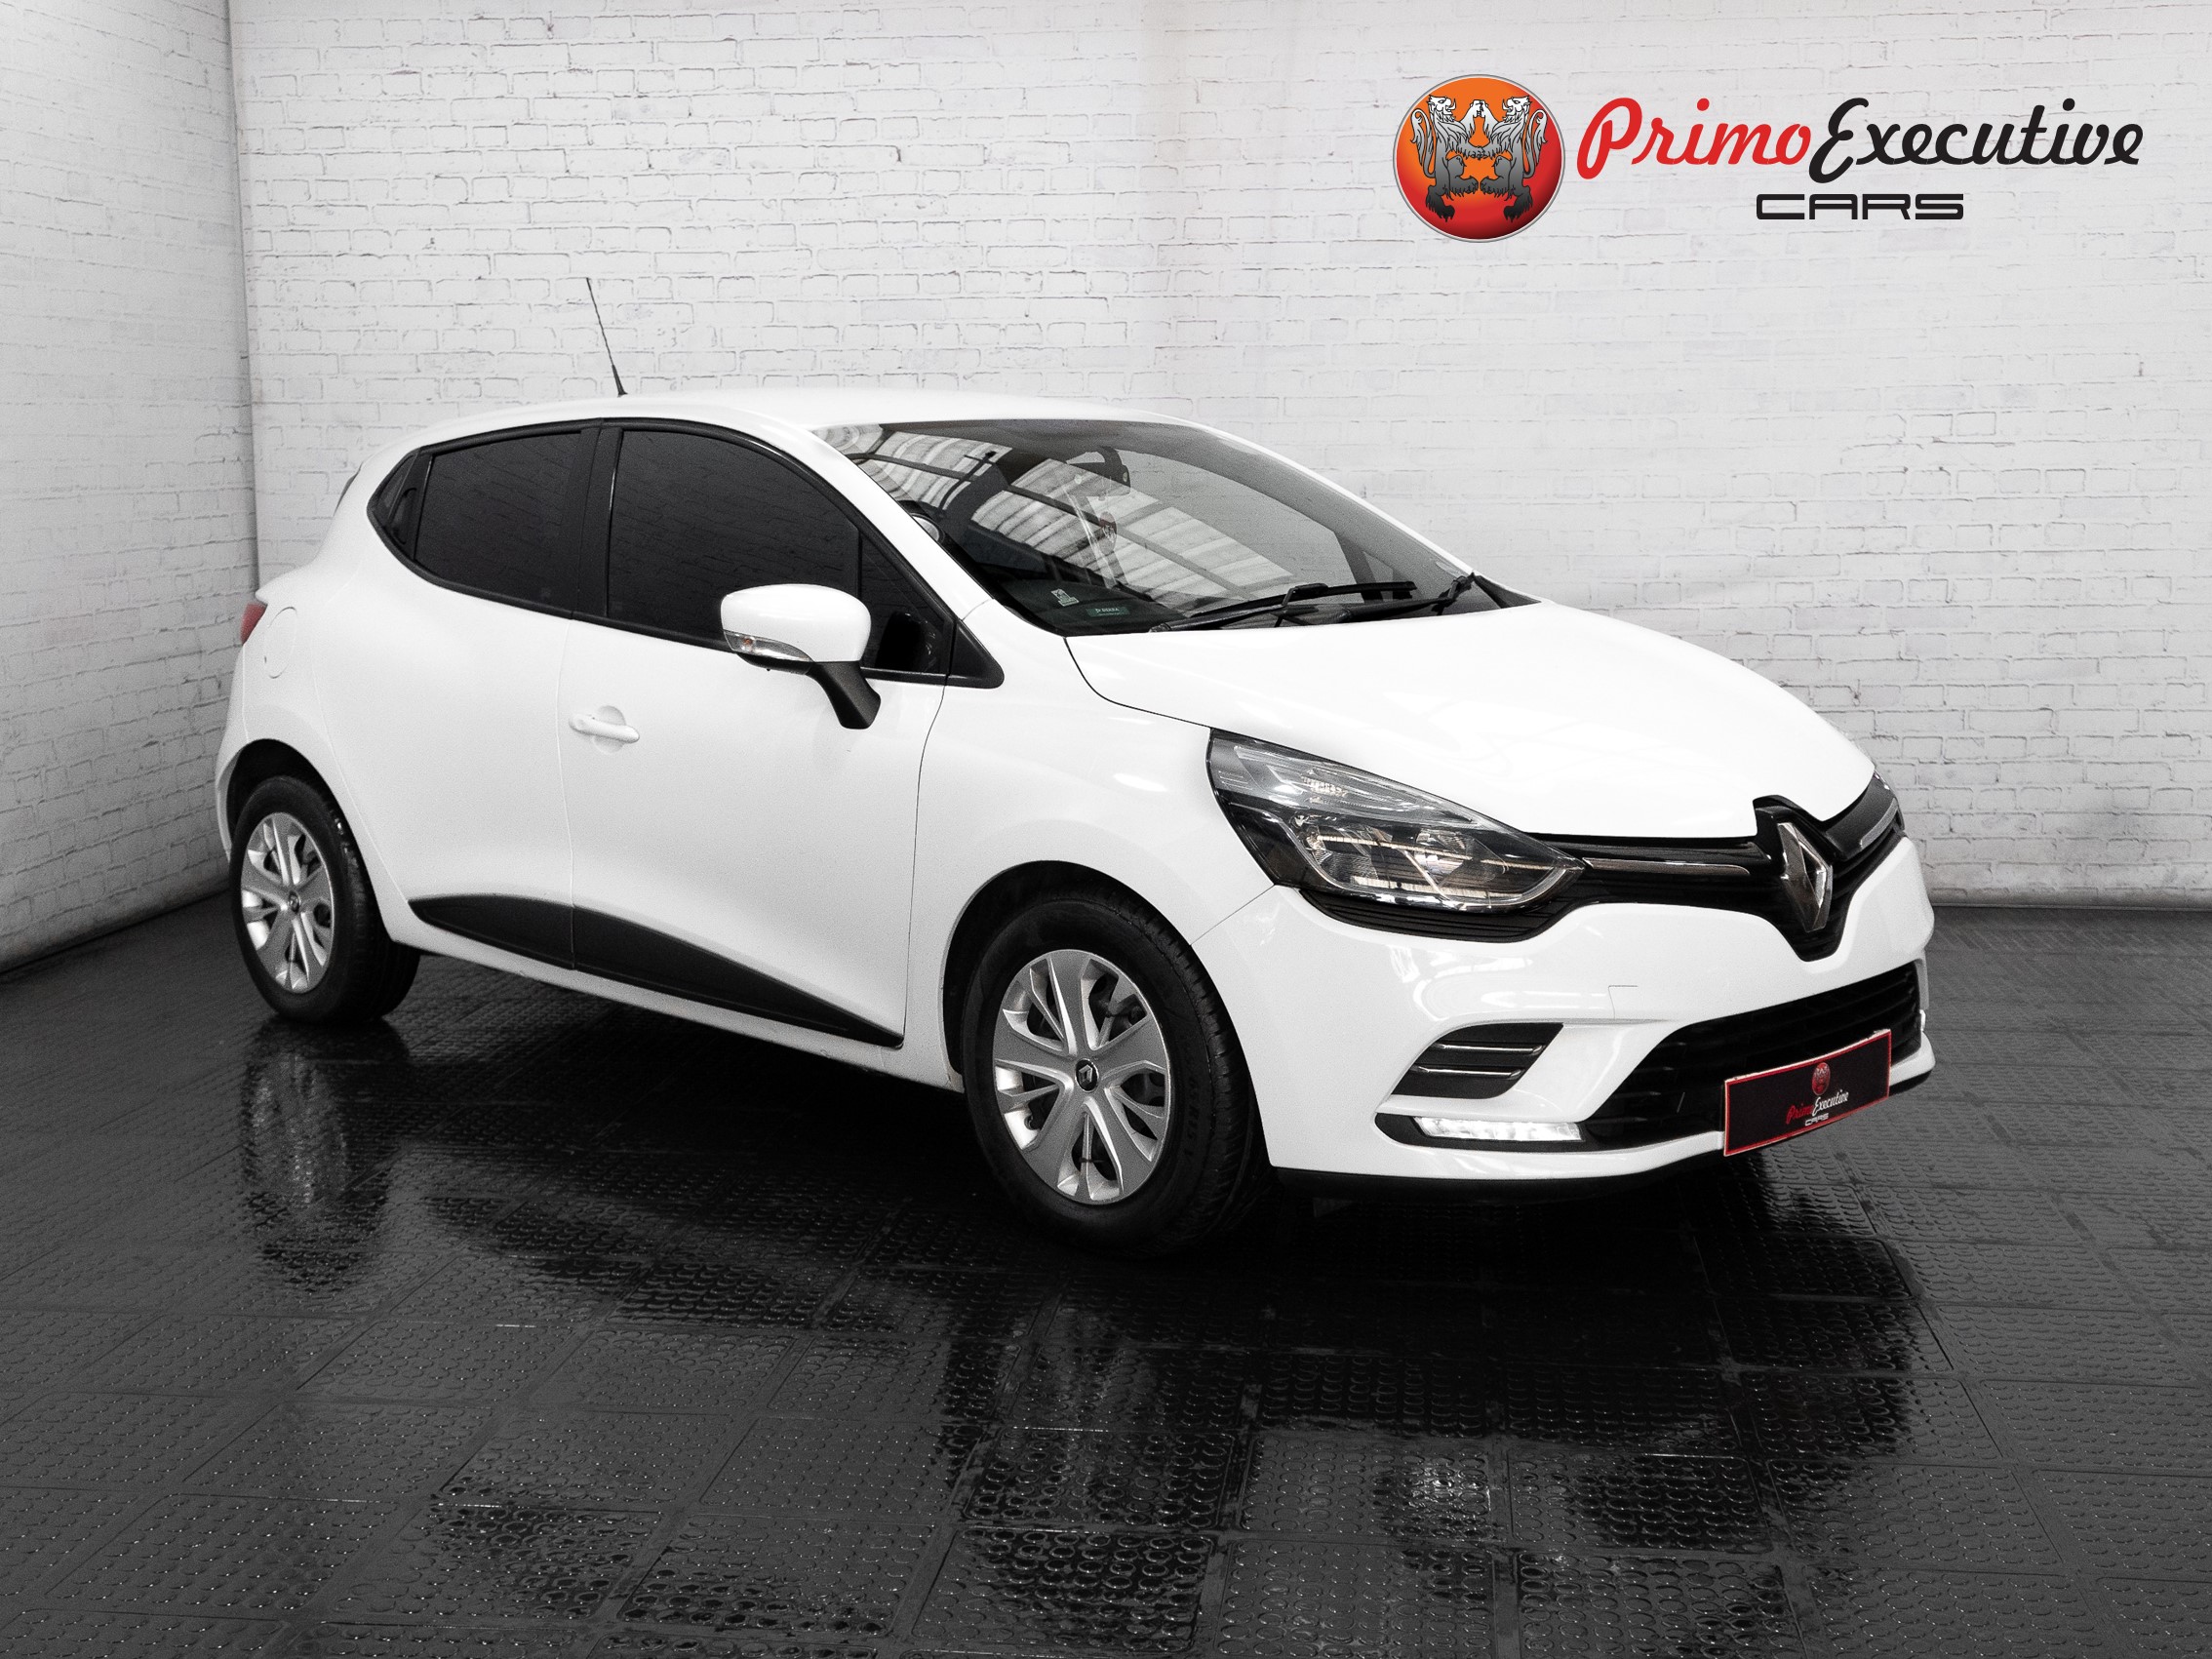 2019 Renault Clio  for sale - 510522